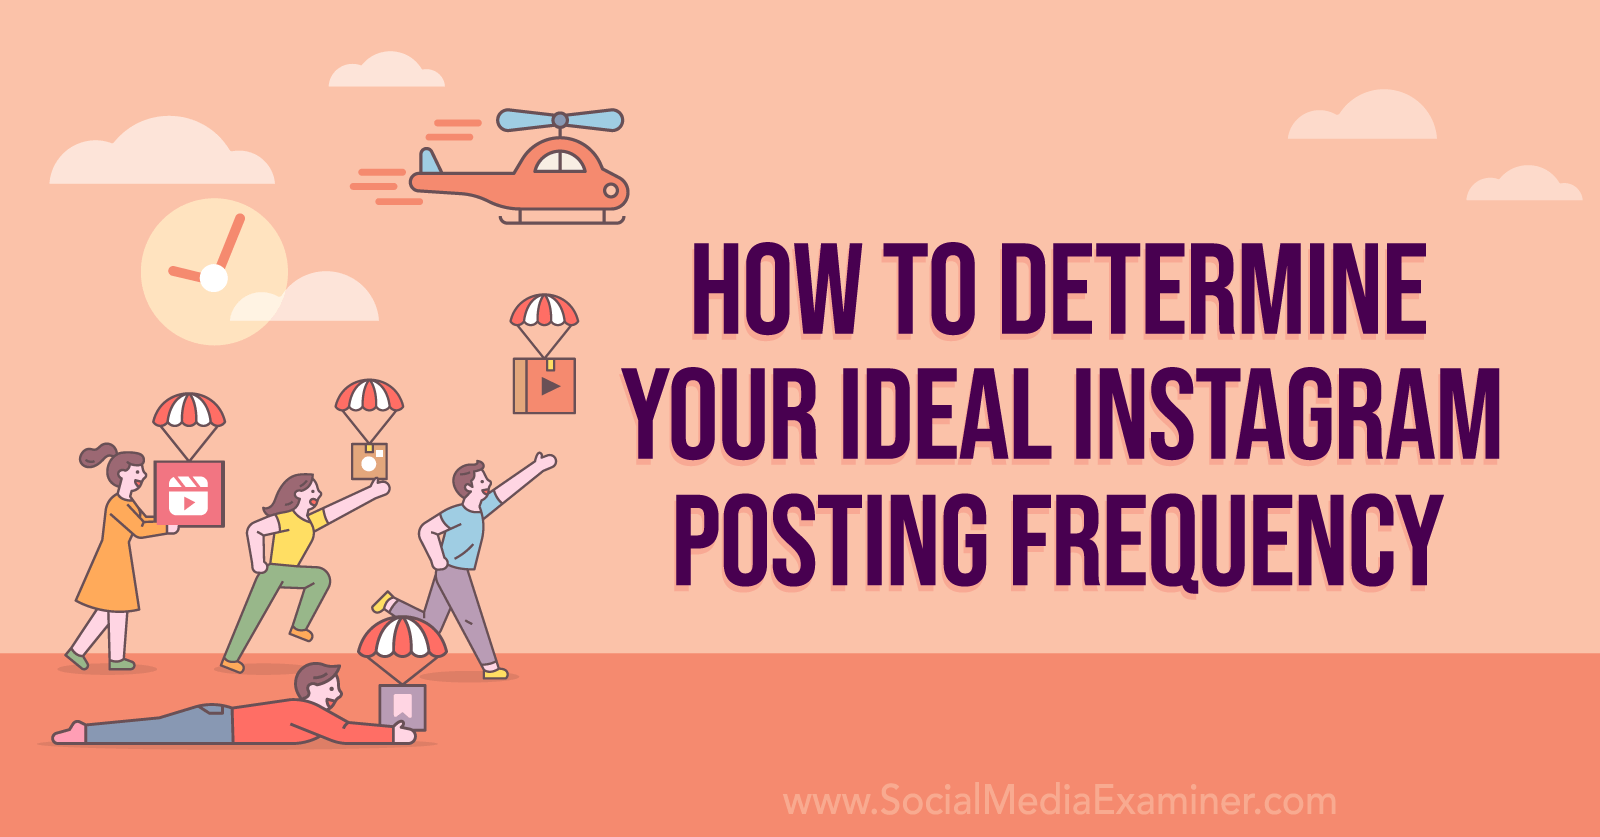 How to Determine Your Ideal Instagram Posting Frequency by Social Media Examiner